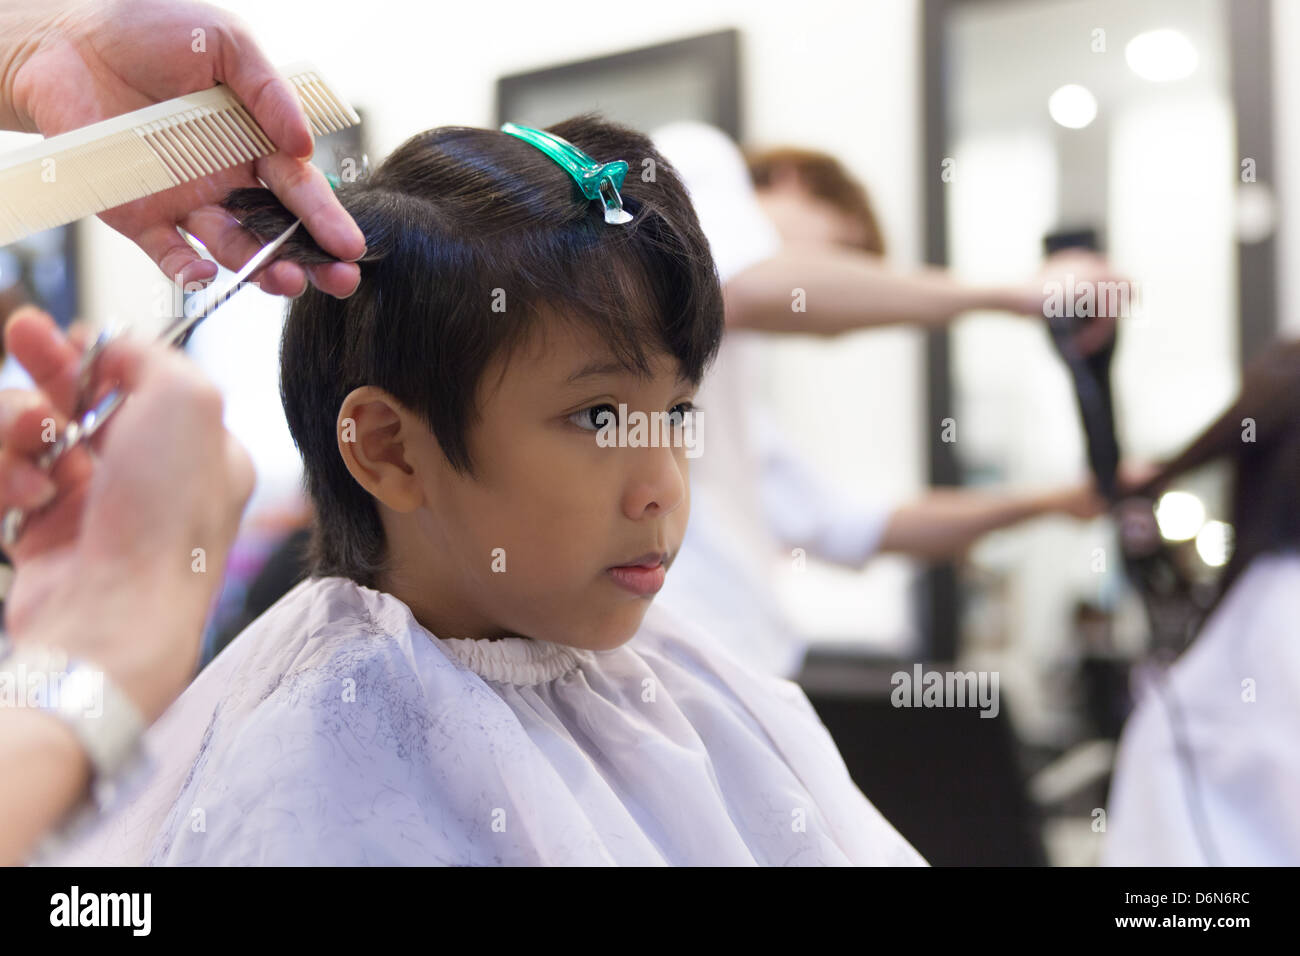 A young boy getting haircut in hair salon Stock Photo - Alamy